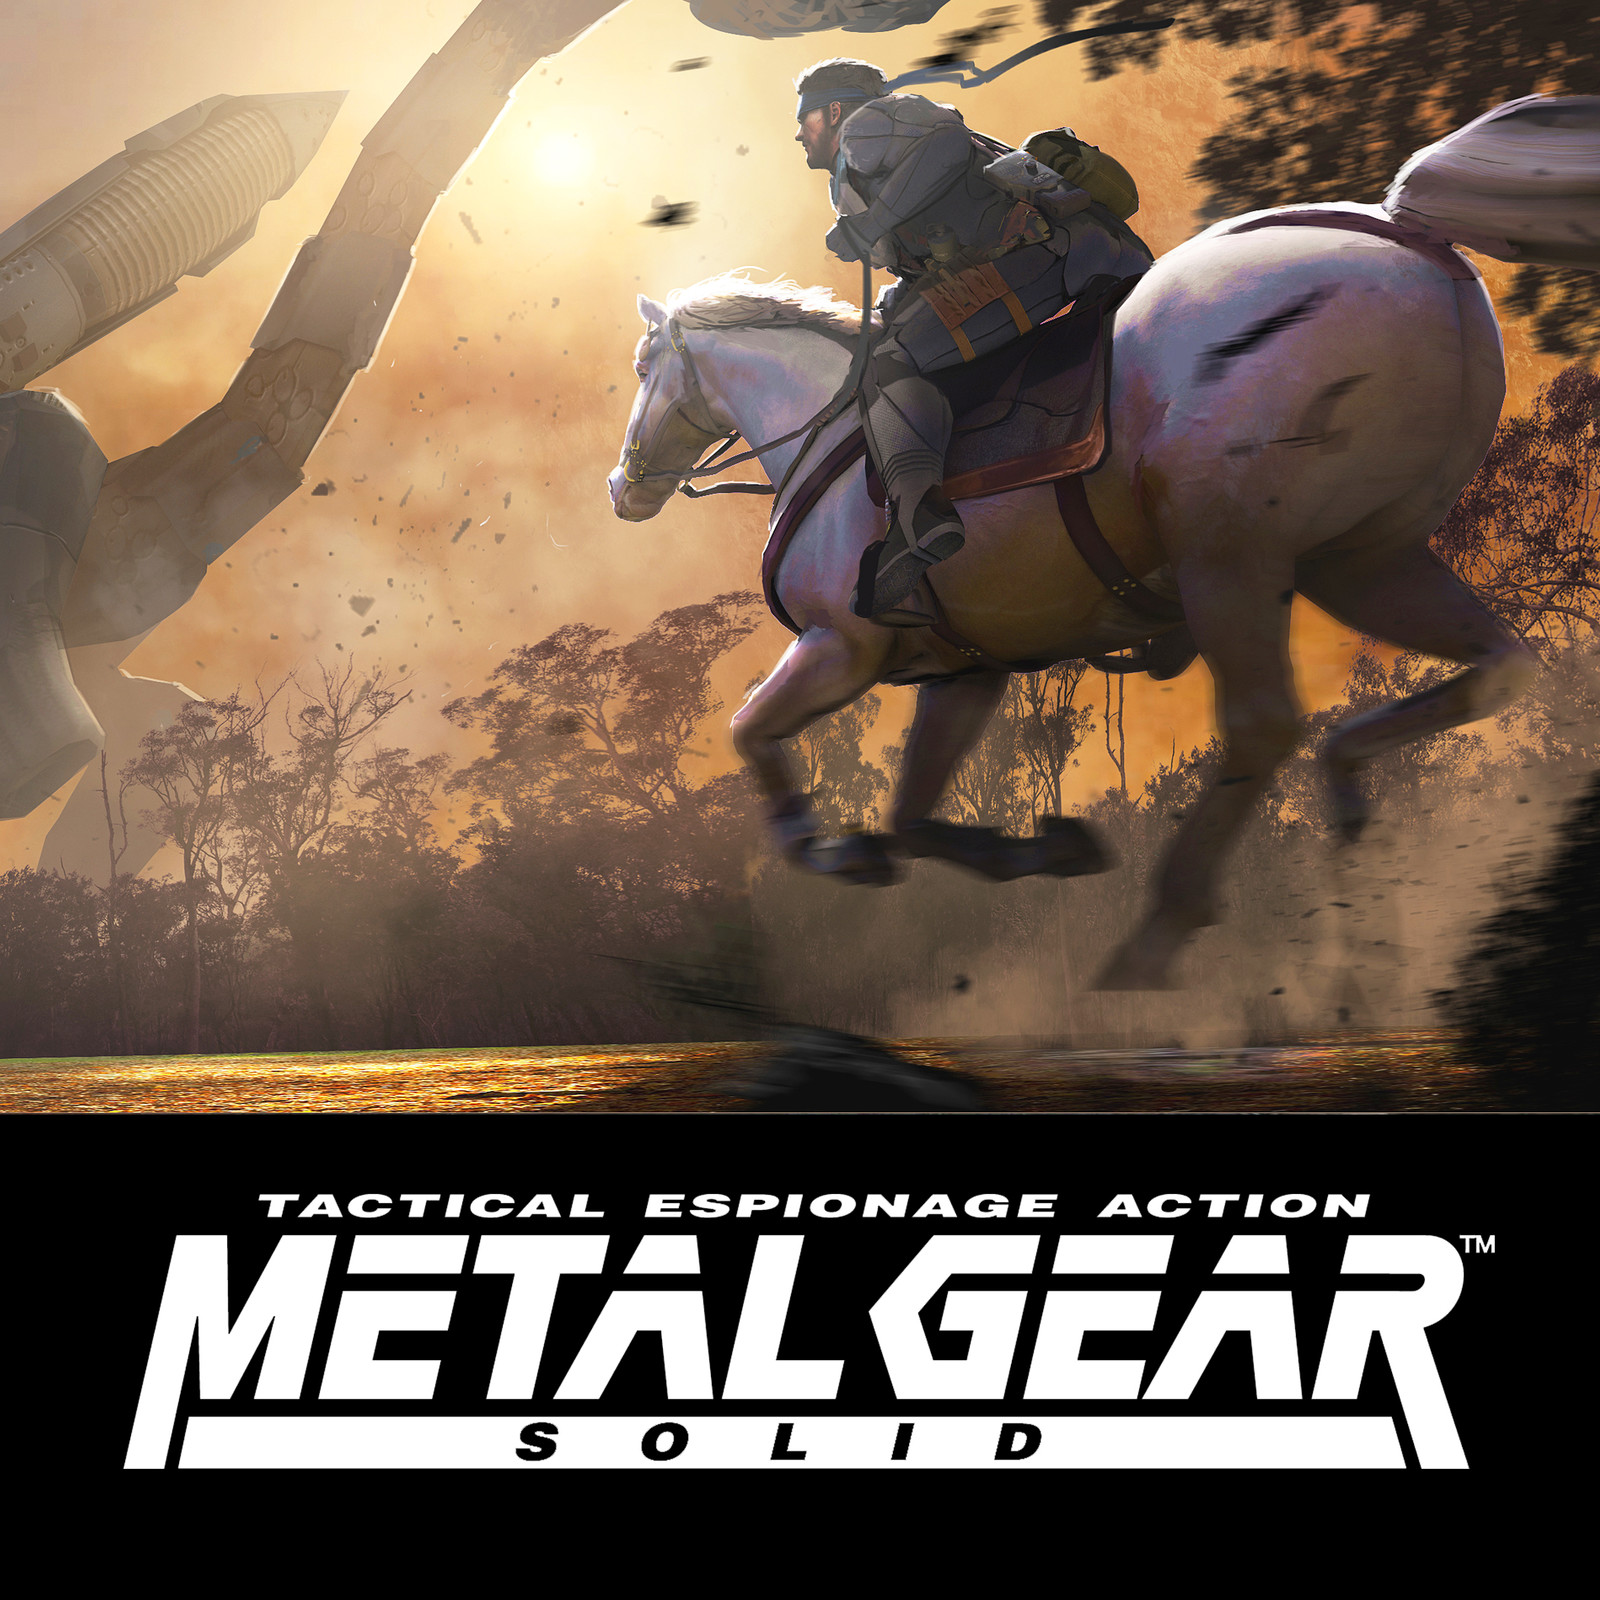  Metal Gear Solid - Snake on  a Horse - day 13 of 31